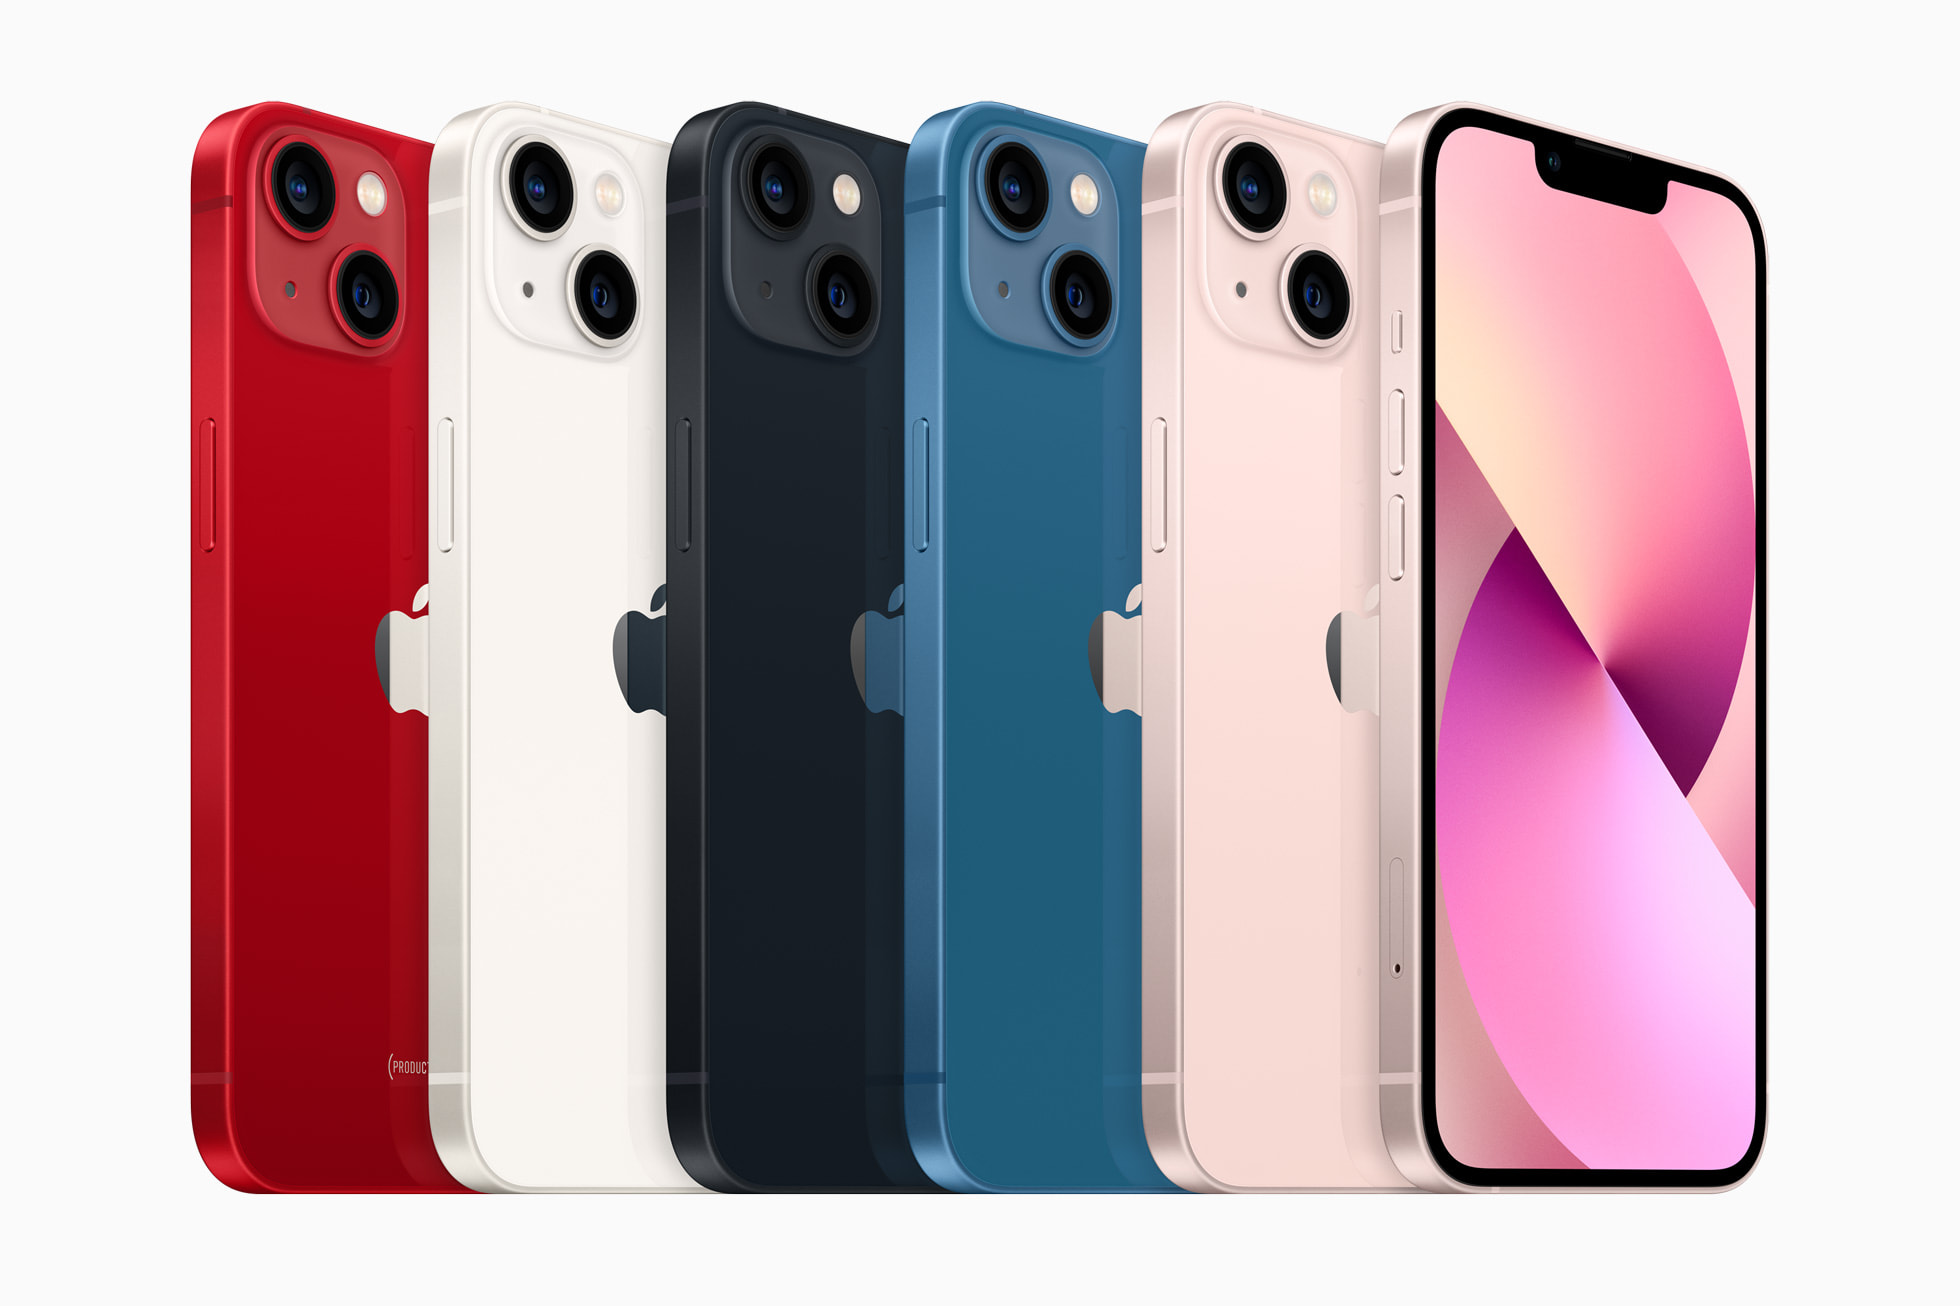 Apple introduces iPhone 13 and iPhone 13 mini, delivering breakthrough